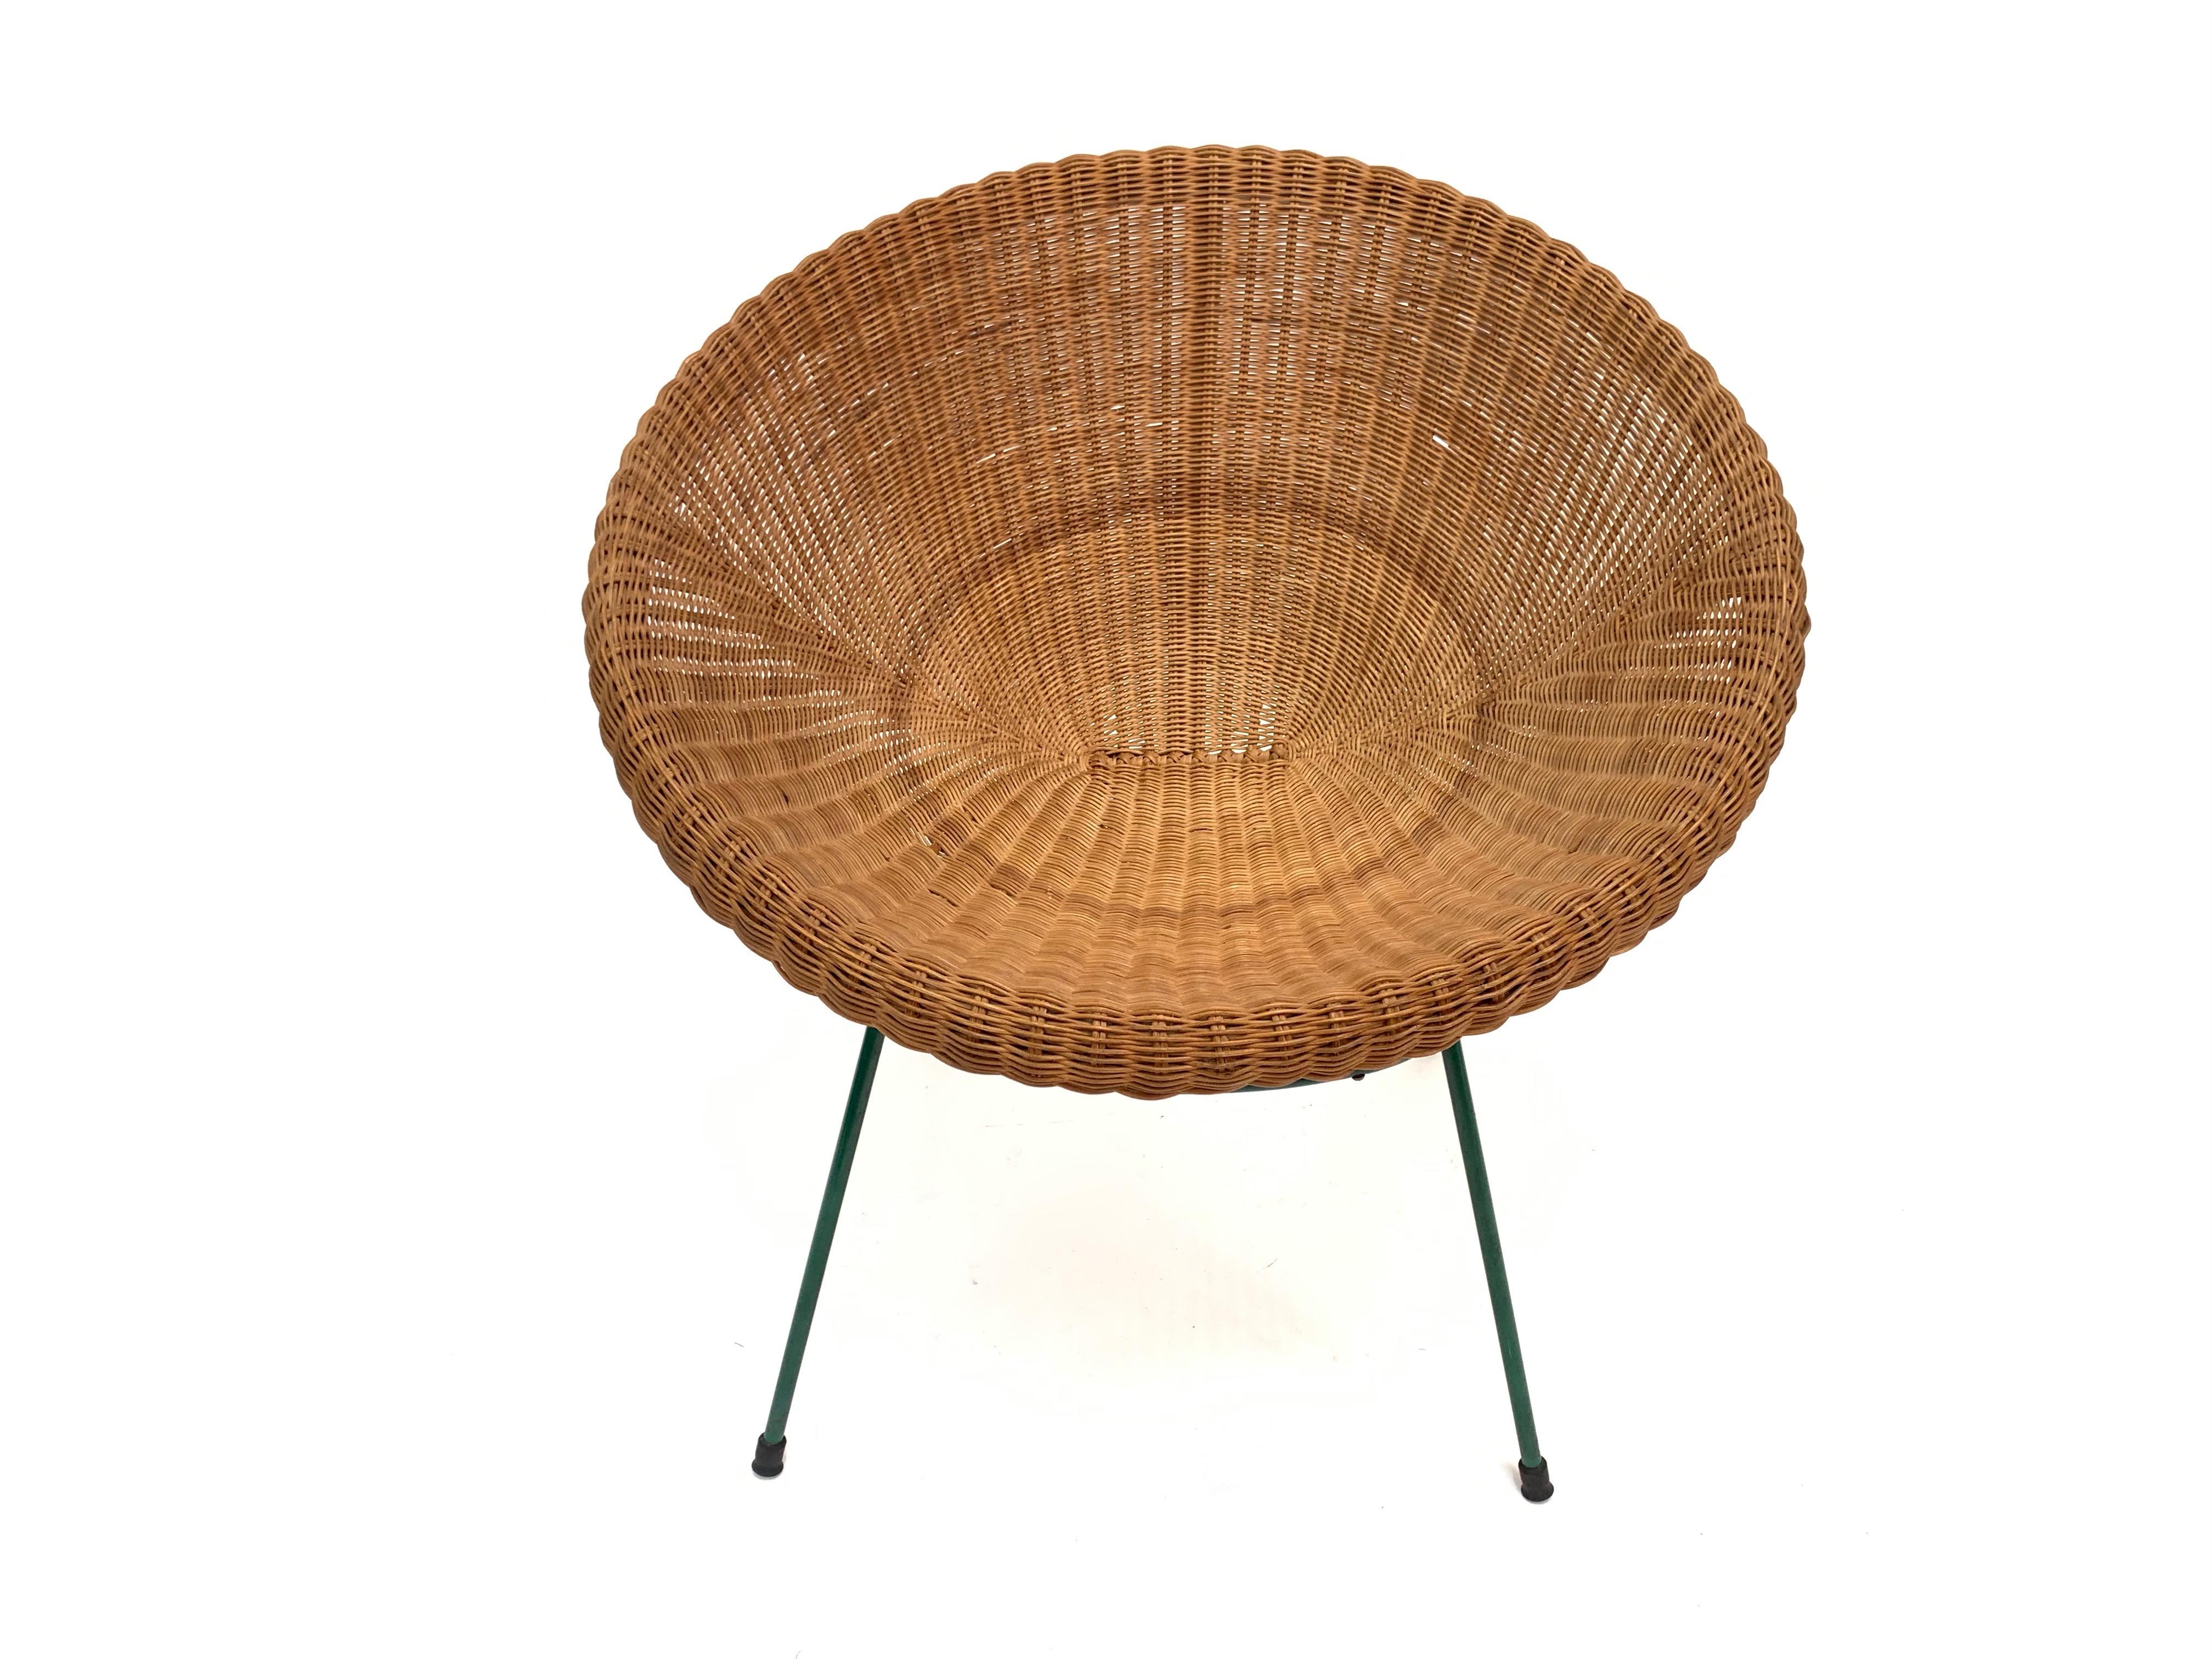 Midcentury Italian Rattan and Bamboo Shell Armchair with Green Metal Legs, 1950s 2